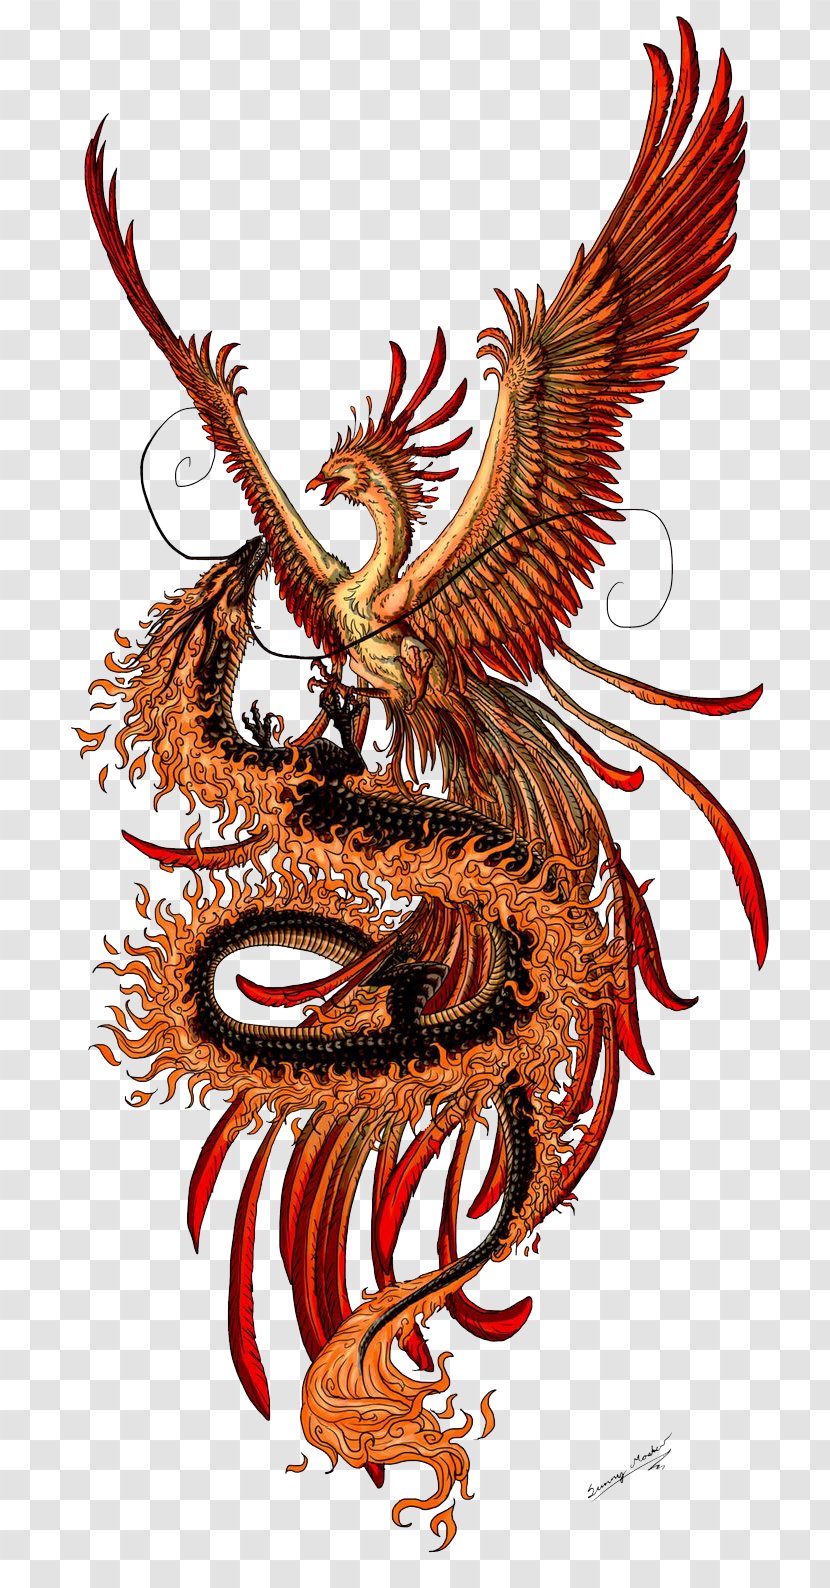 Phoenix Chinese Dragon Fenghuang Tattoo - Symbol - Tattoos Transparent Images Transparent PNG